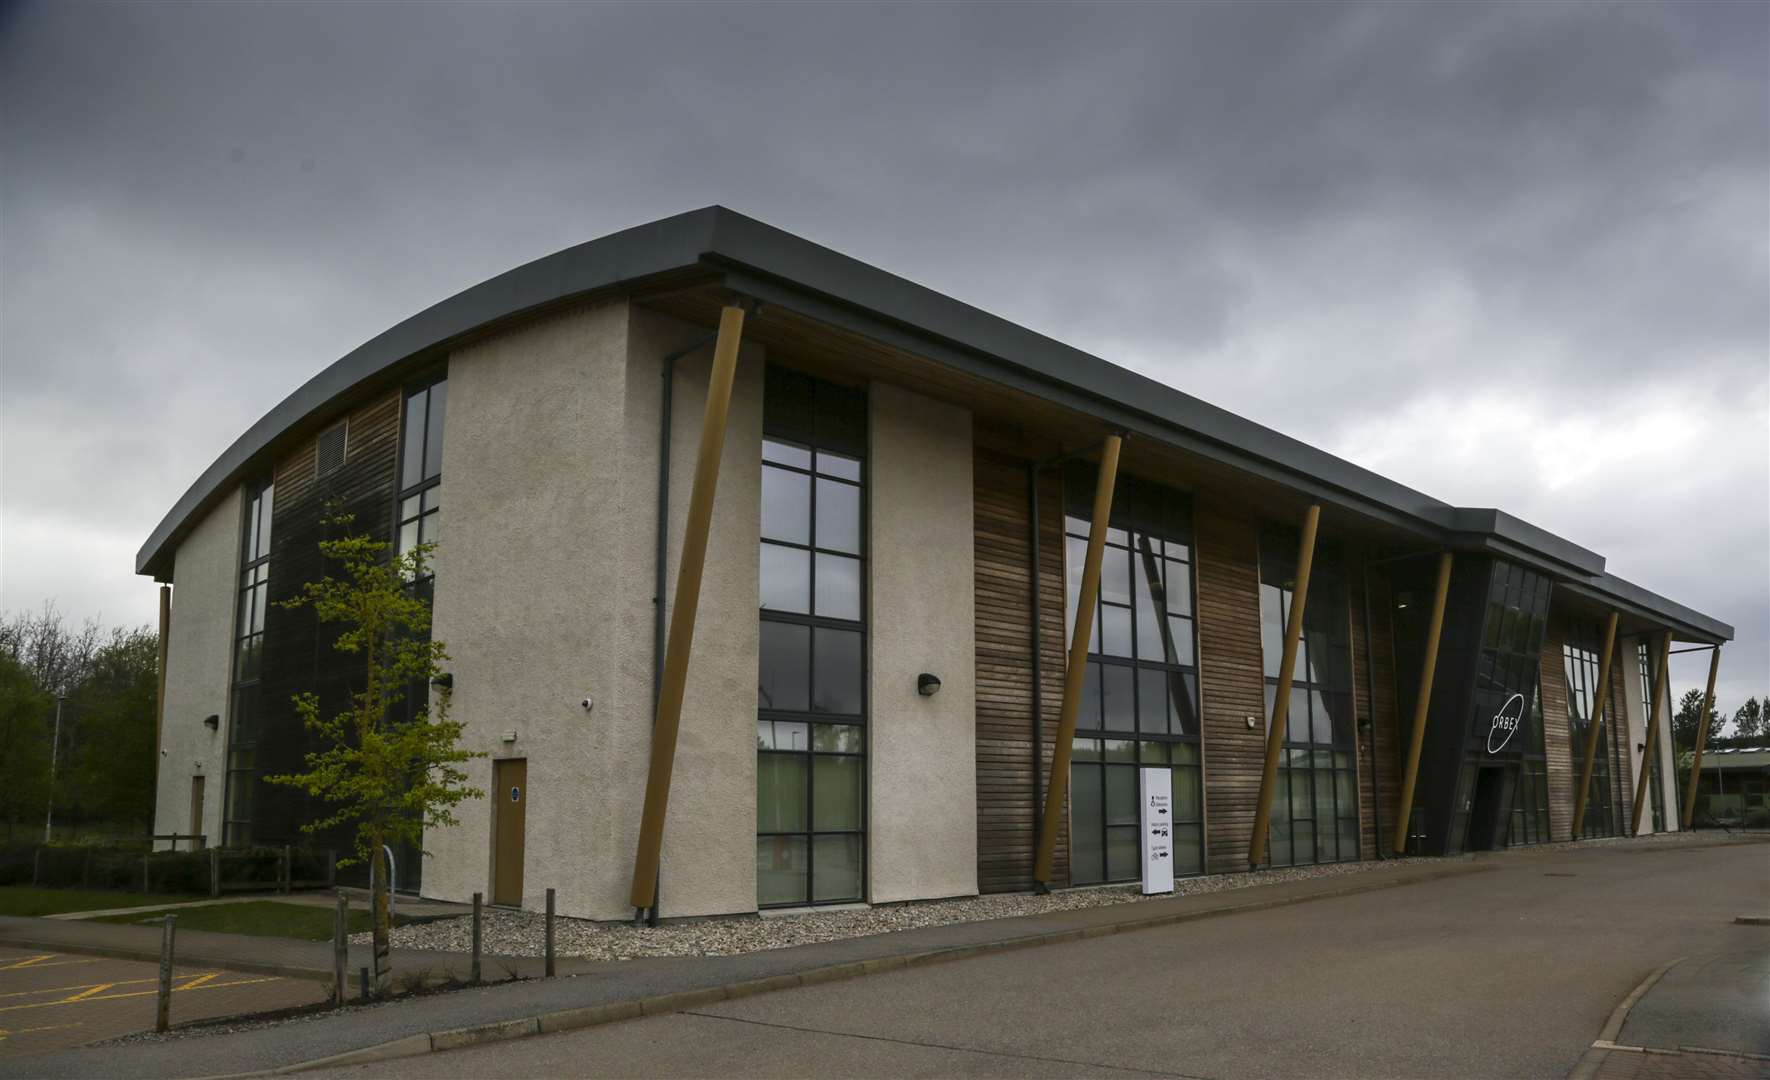 Orbex's headquarters at the Enterprise Park in Forres.